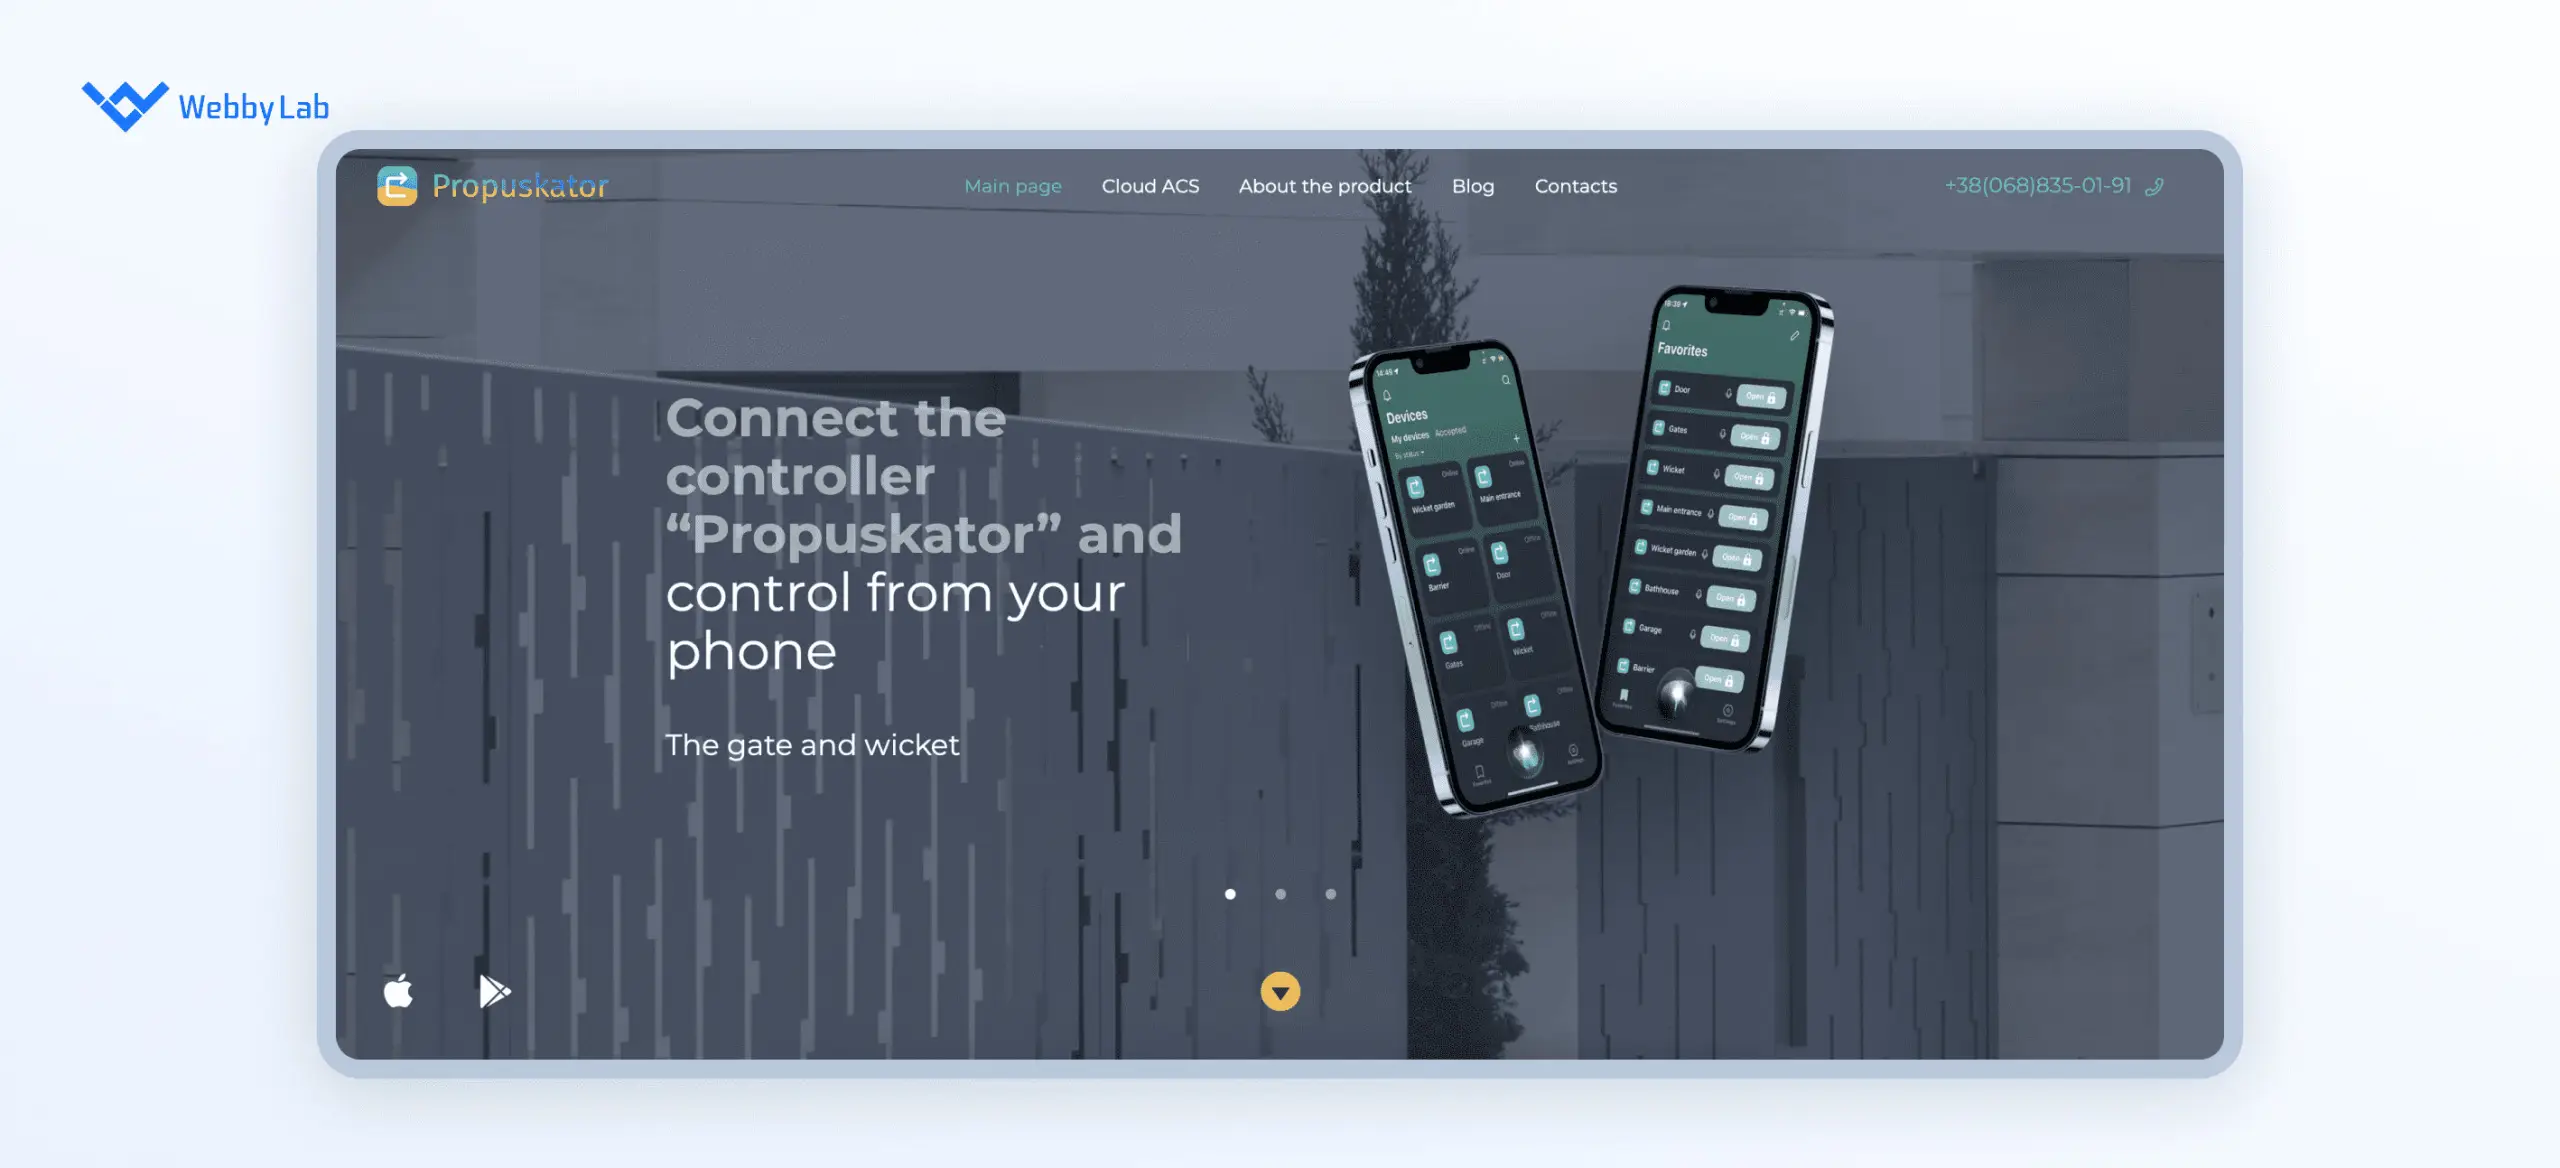 The Propuskator access control and management system developed by WebbyLab.